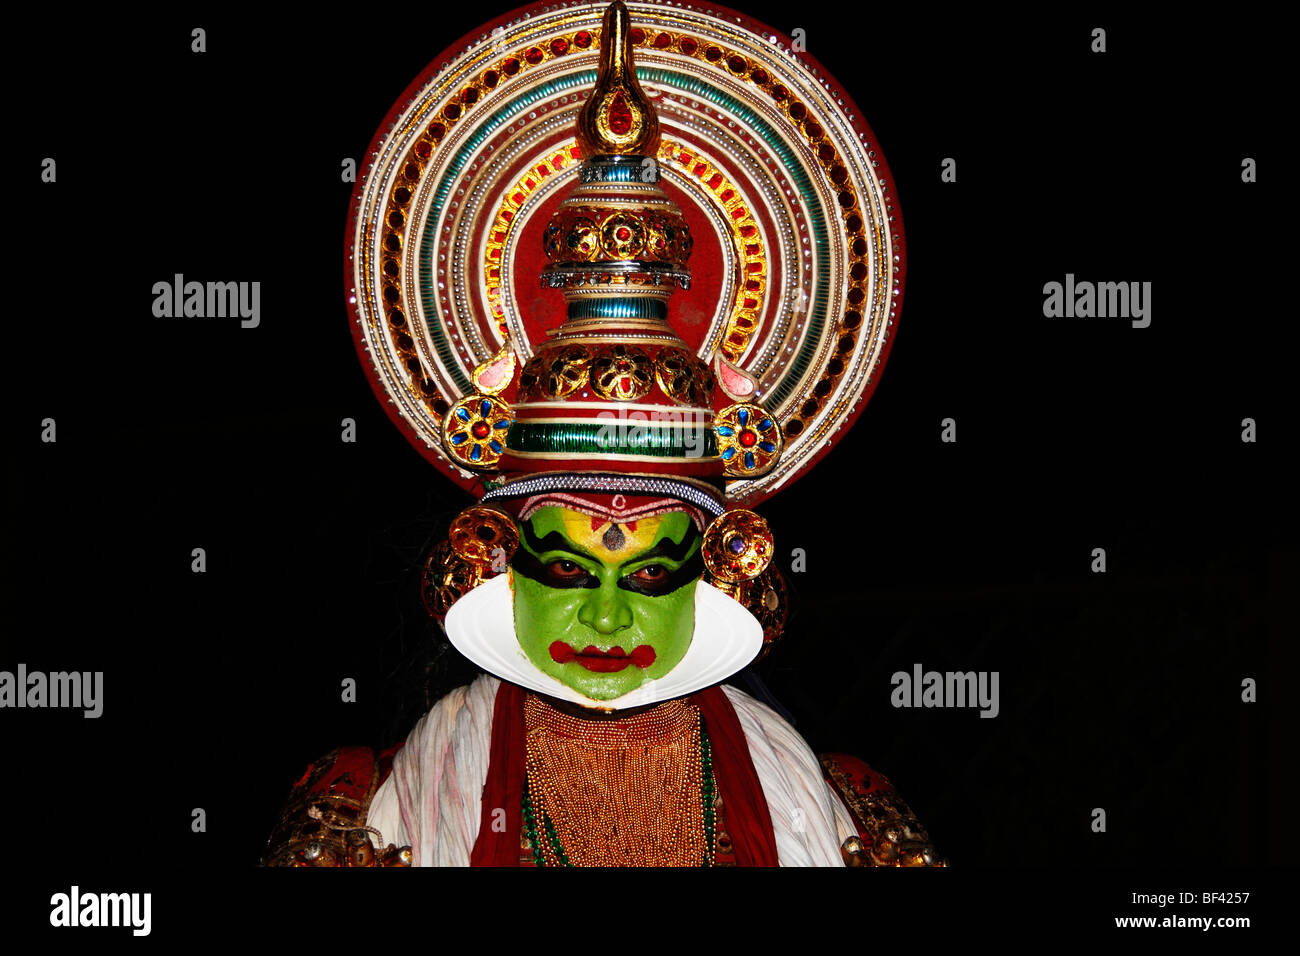 kathakali,portrait,colored face,indian,dance drama,crown,red eyes,red lips,greenish face,tribal,colored Stock Photo